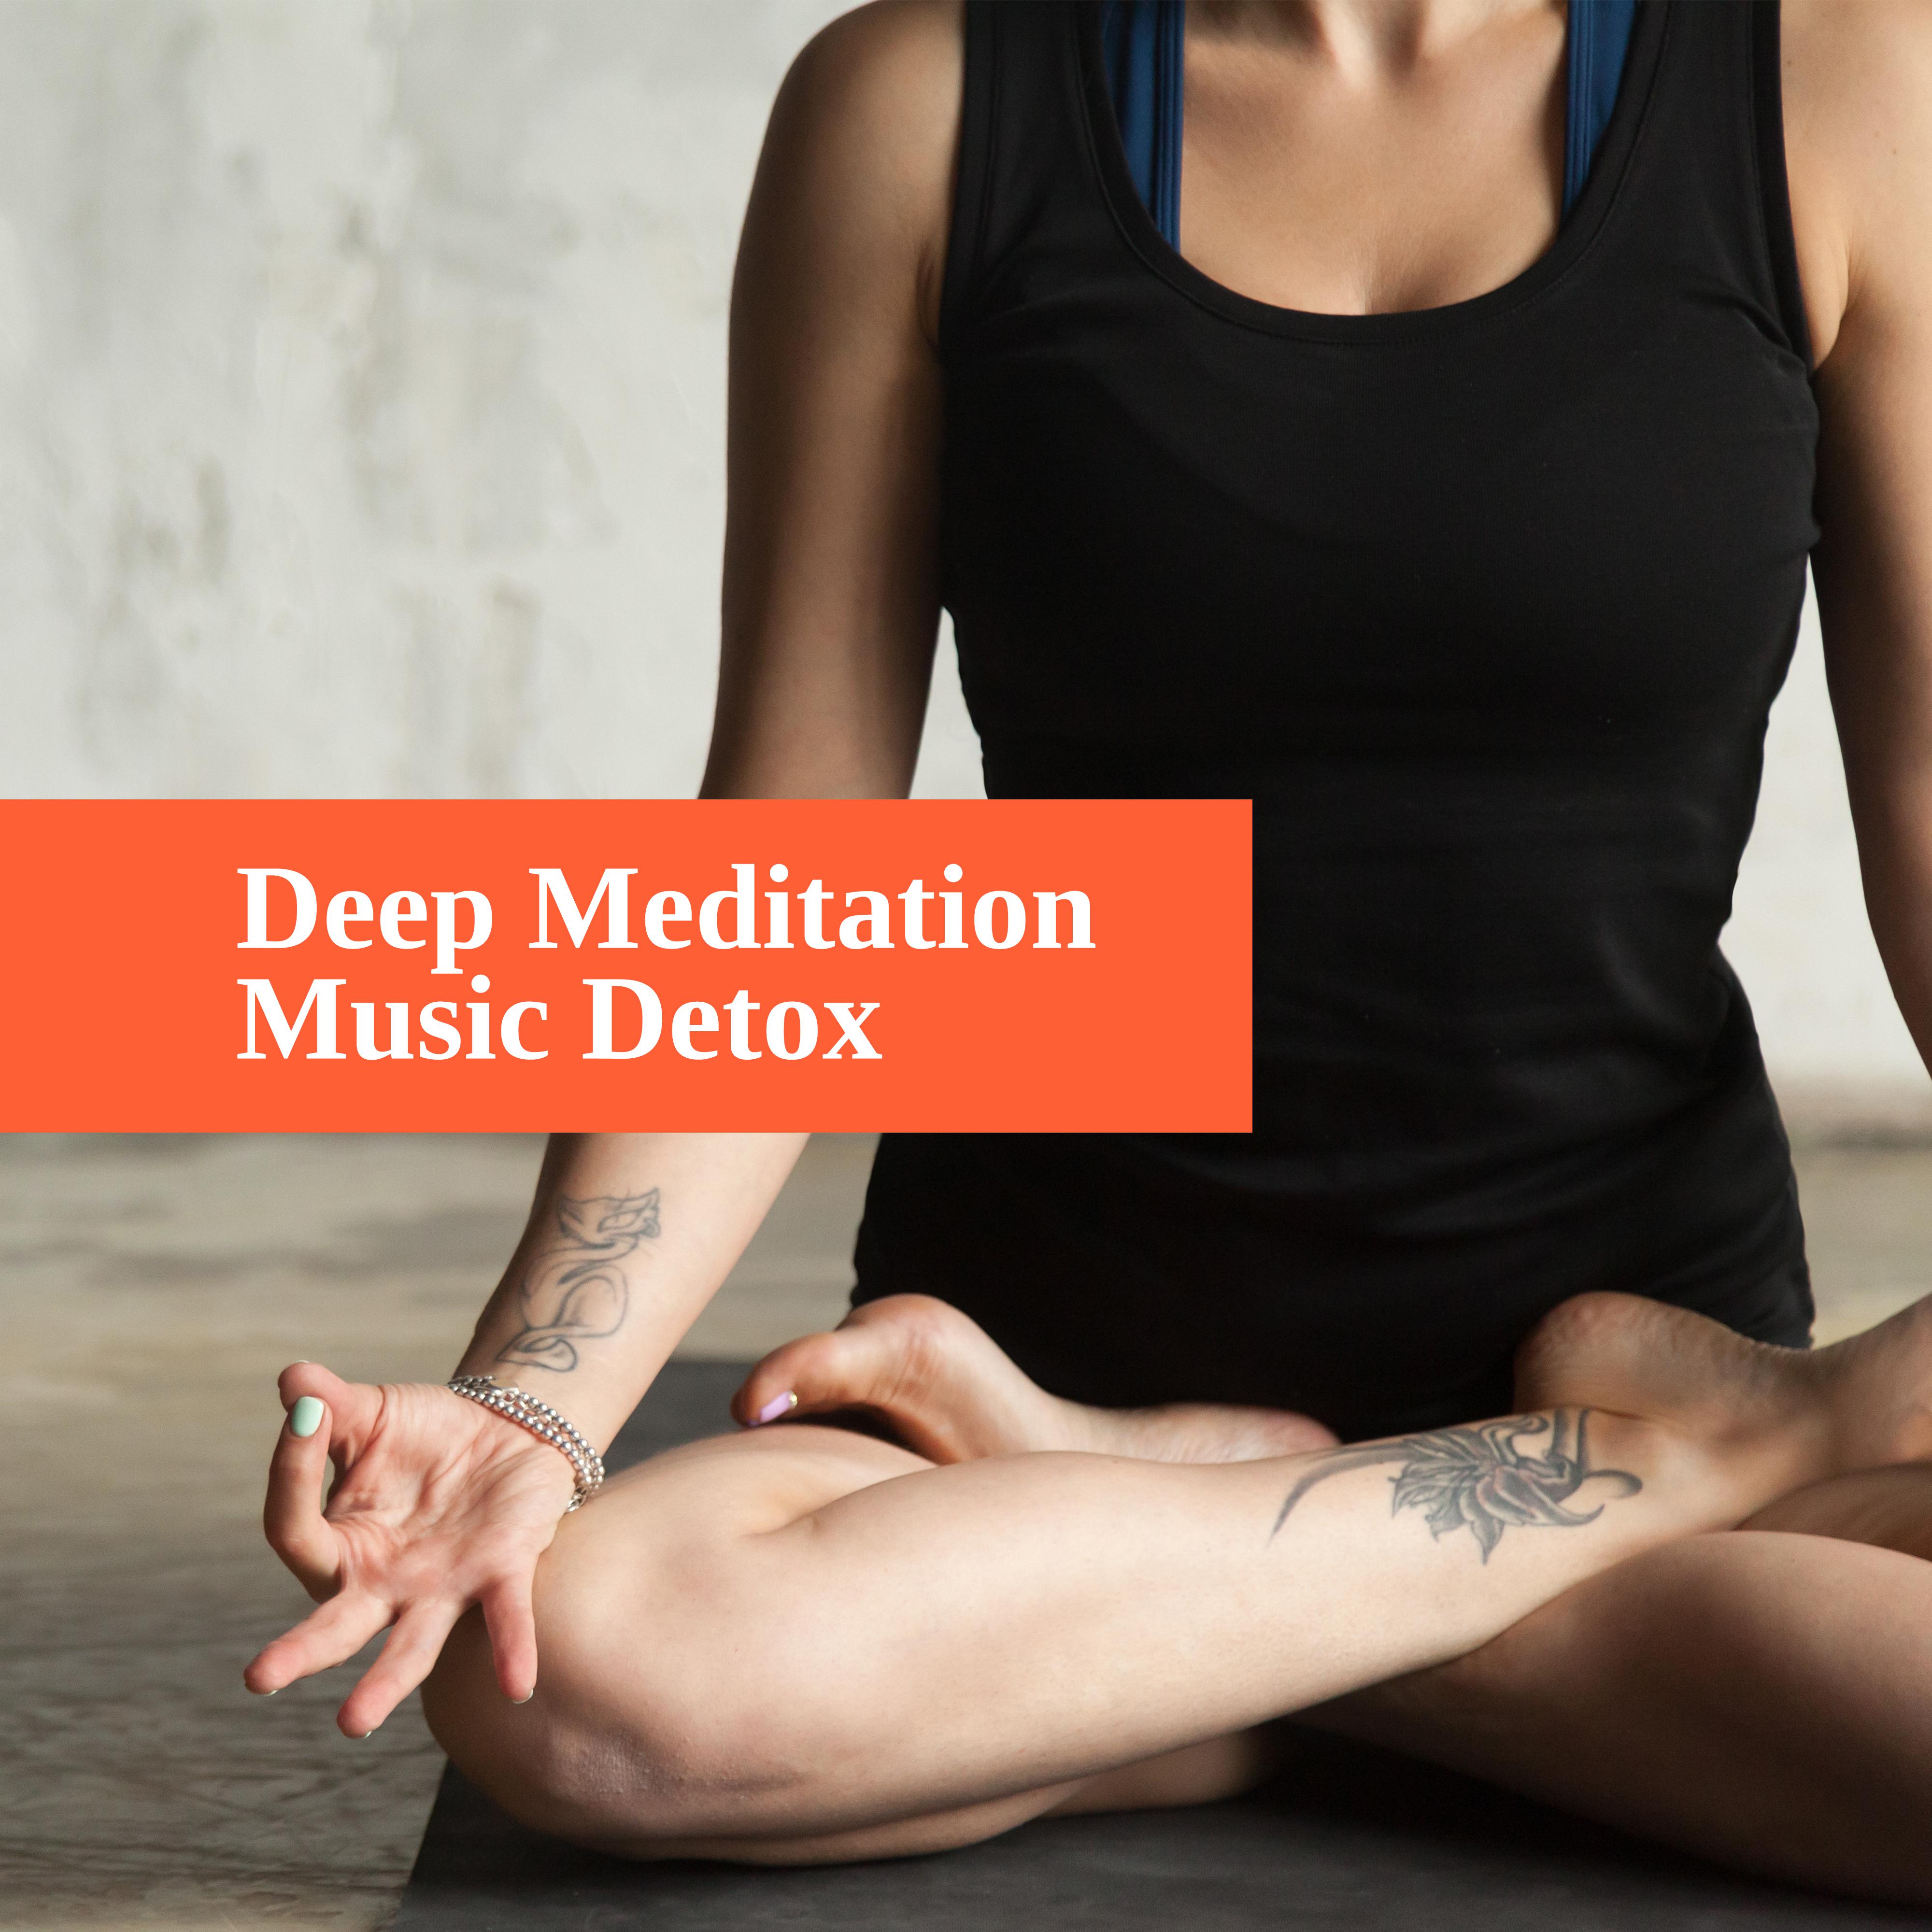 Deep Meditation Music Detox: 15 New Age Yoga & Relaxing Songs for Pure Meditation, Stress Relief, Calming Down